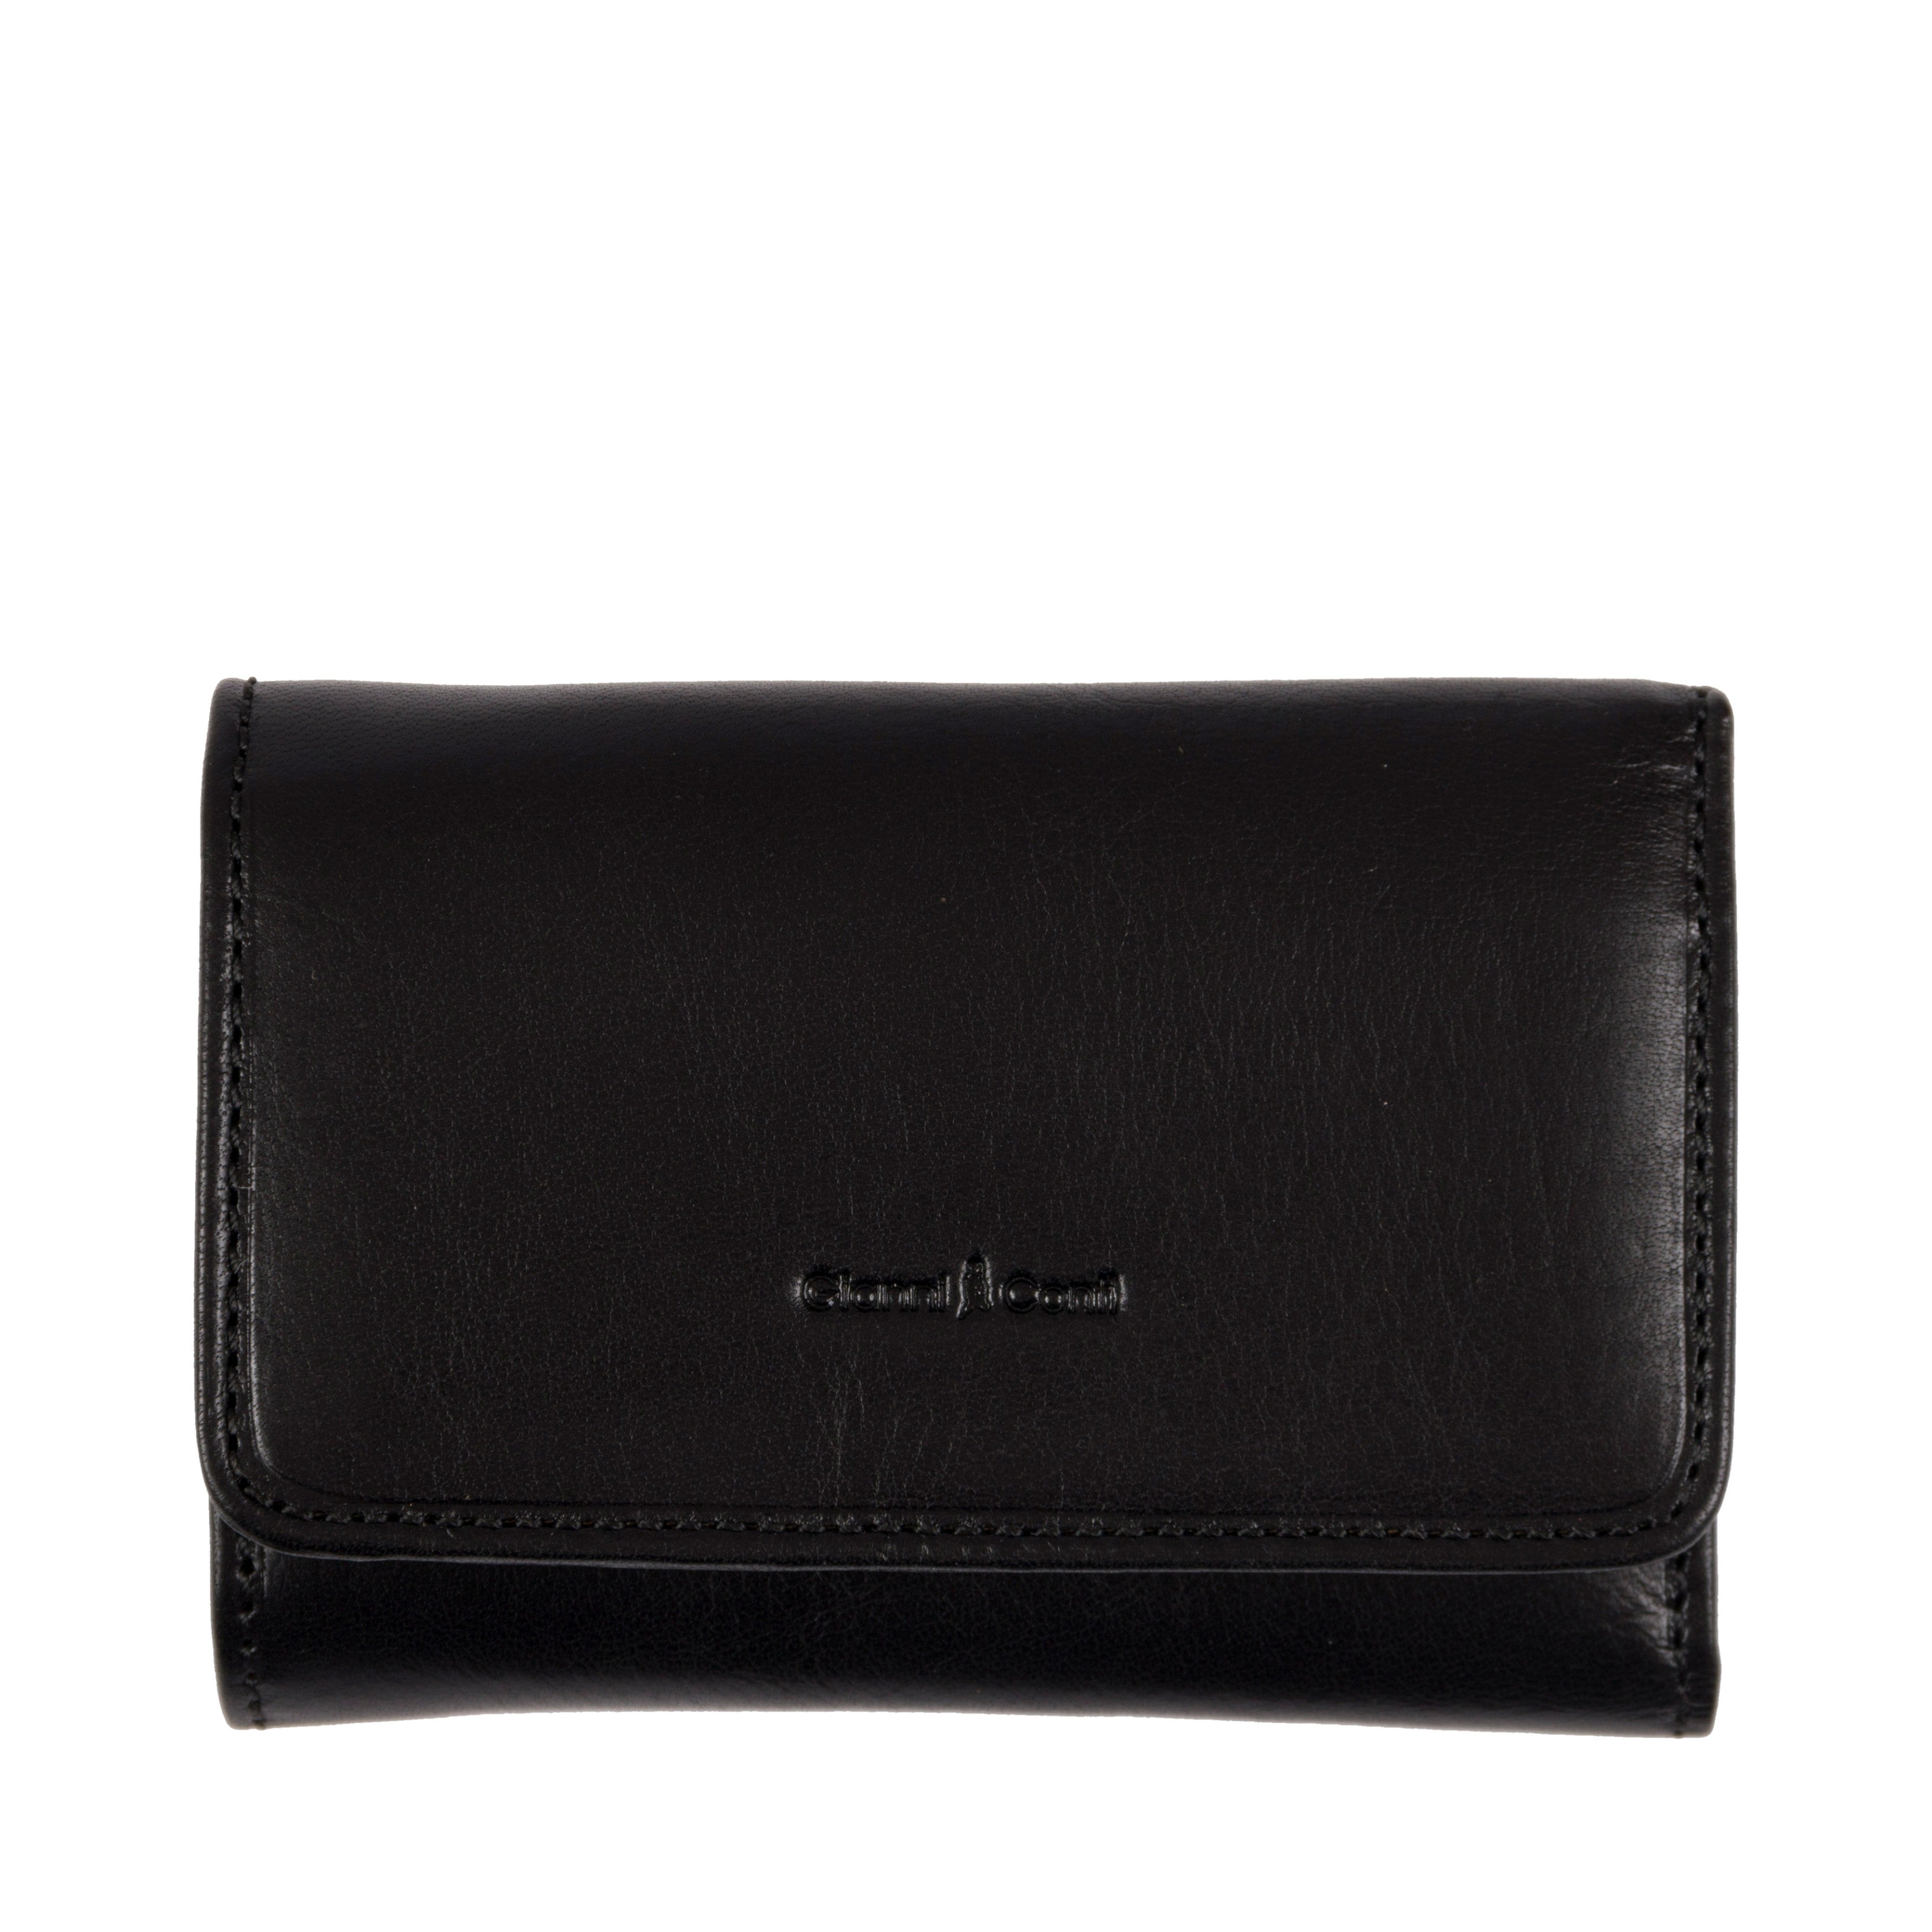 TIRSO Vegetable-Tanned Leather Wallet by Gianni Conti